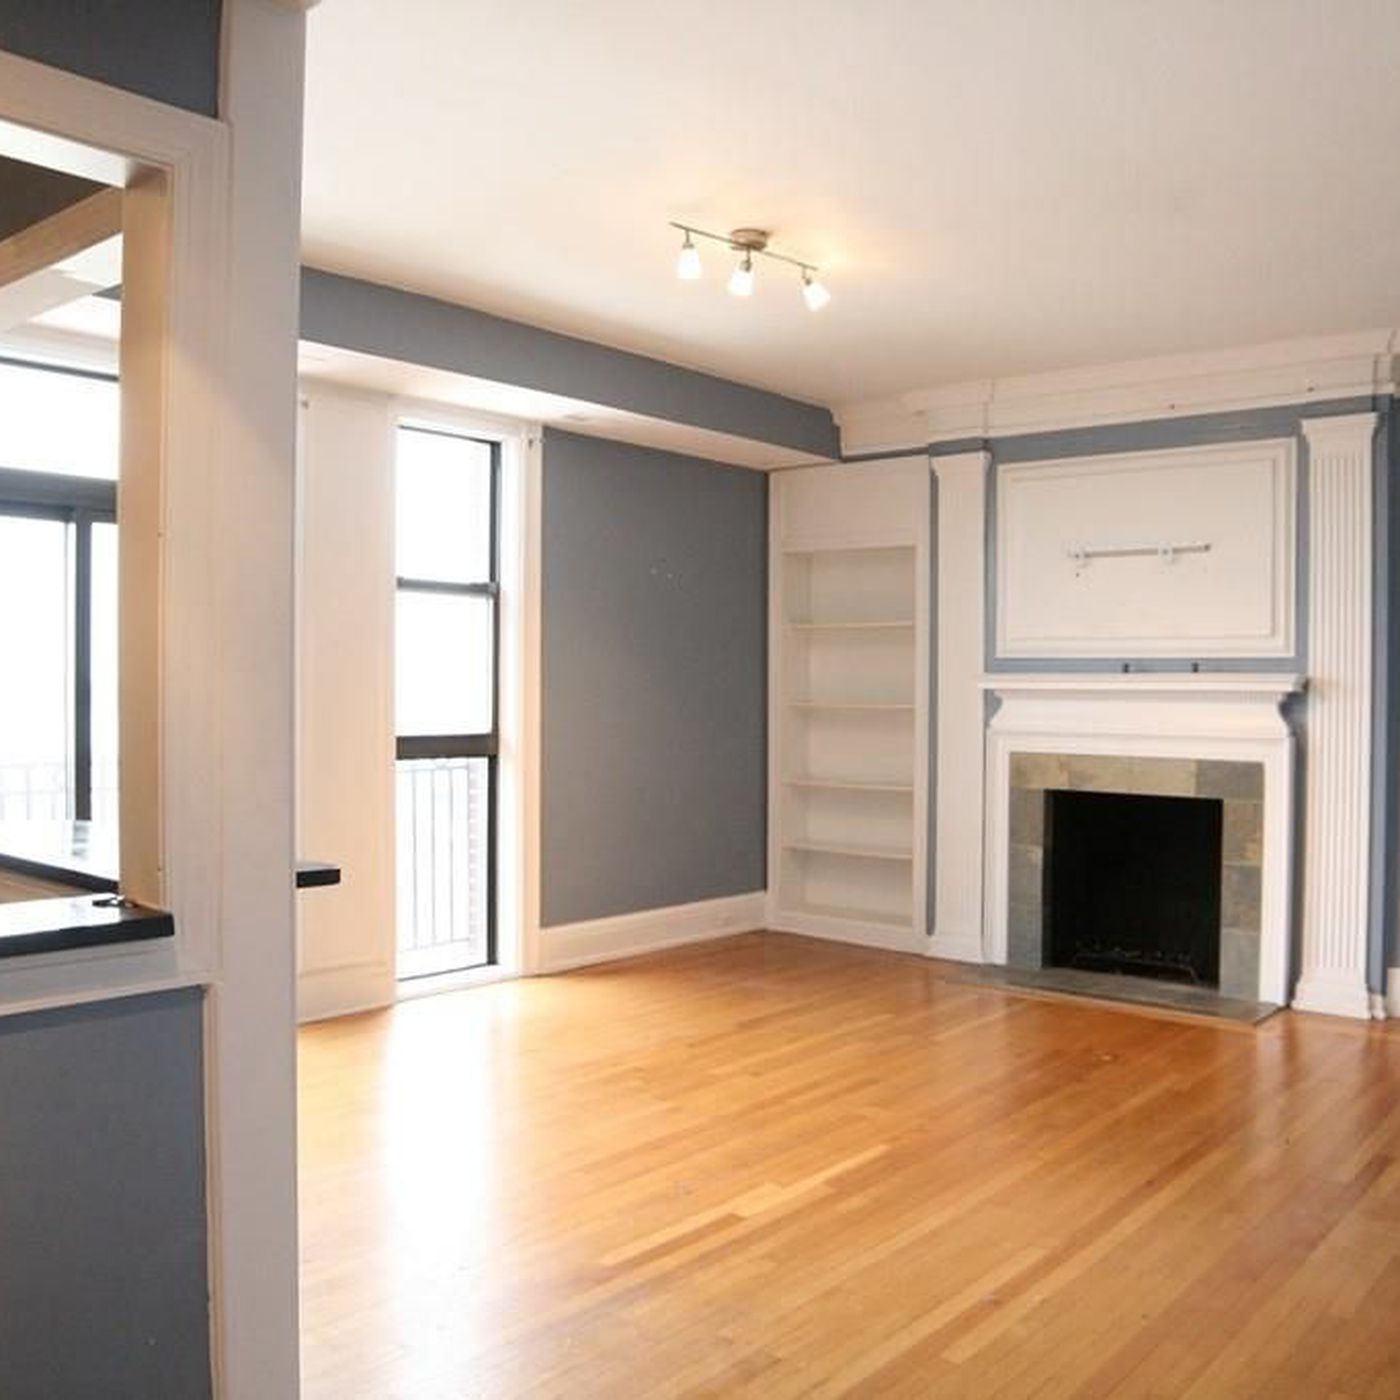 Rent A Center Fireplace Fresh What $1 050 Rents In Detroit Right now Curbed Detroit